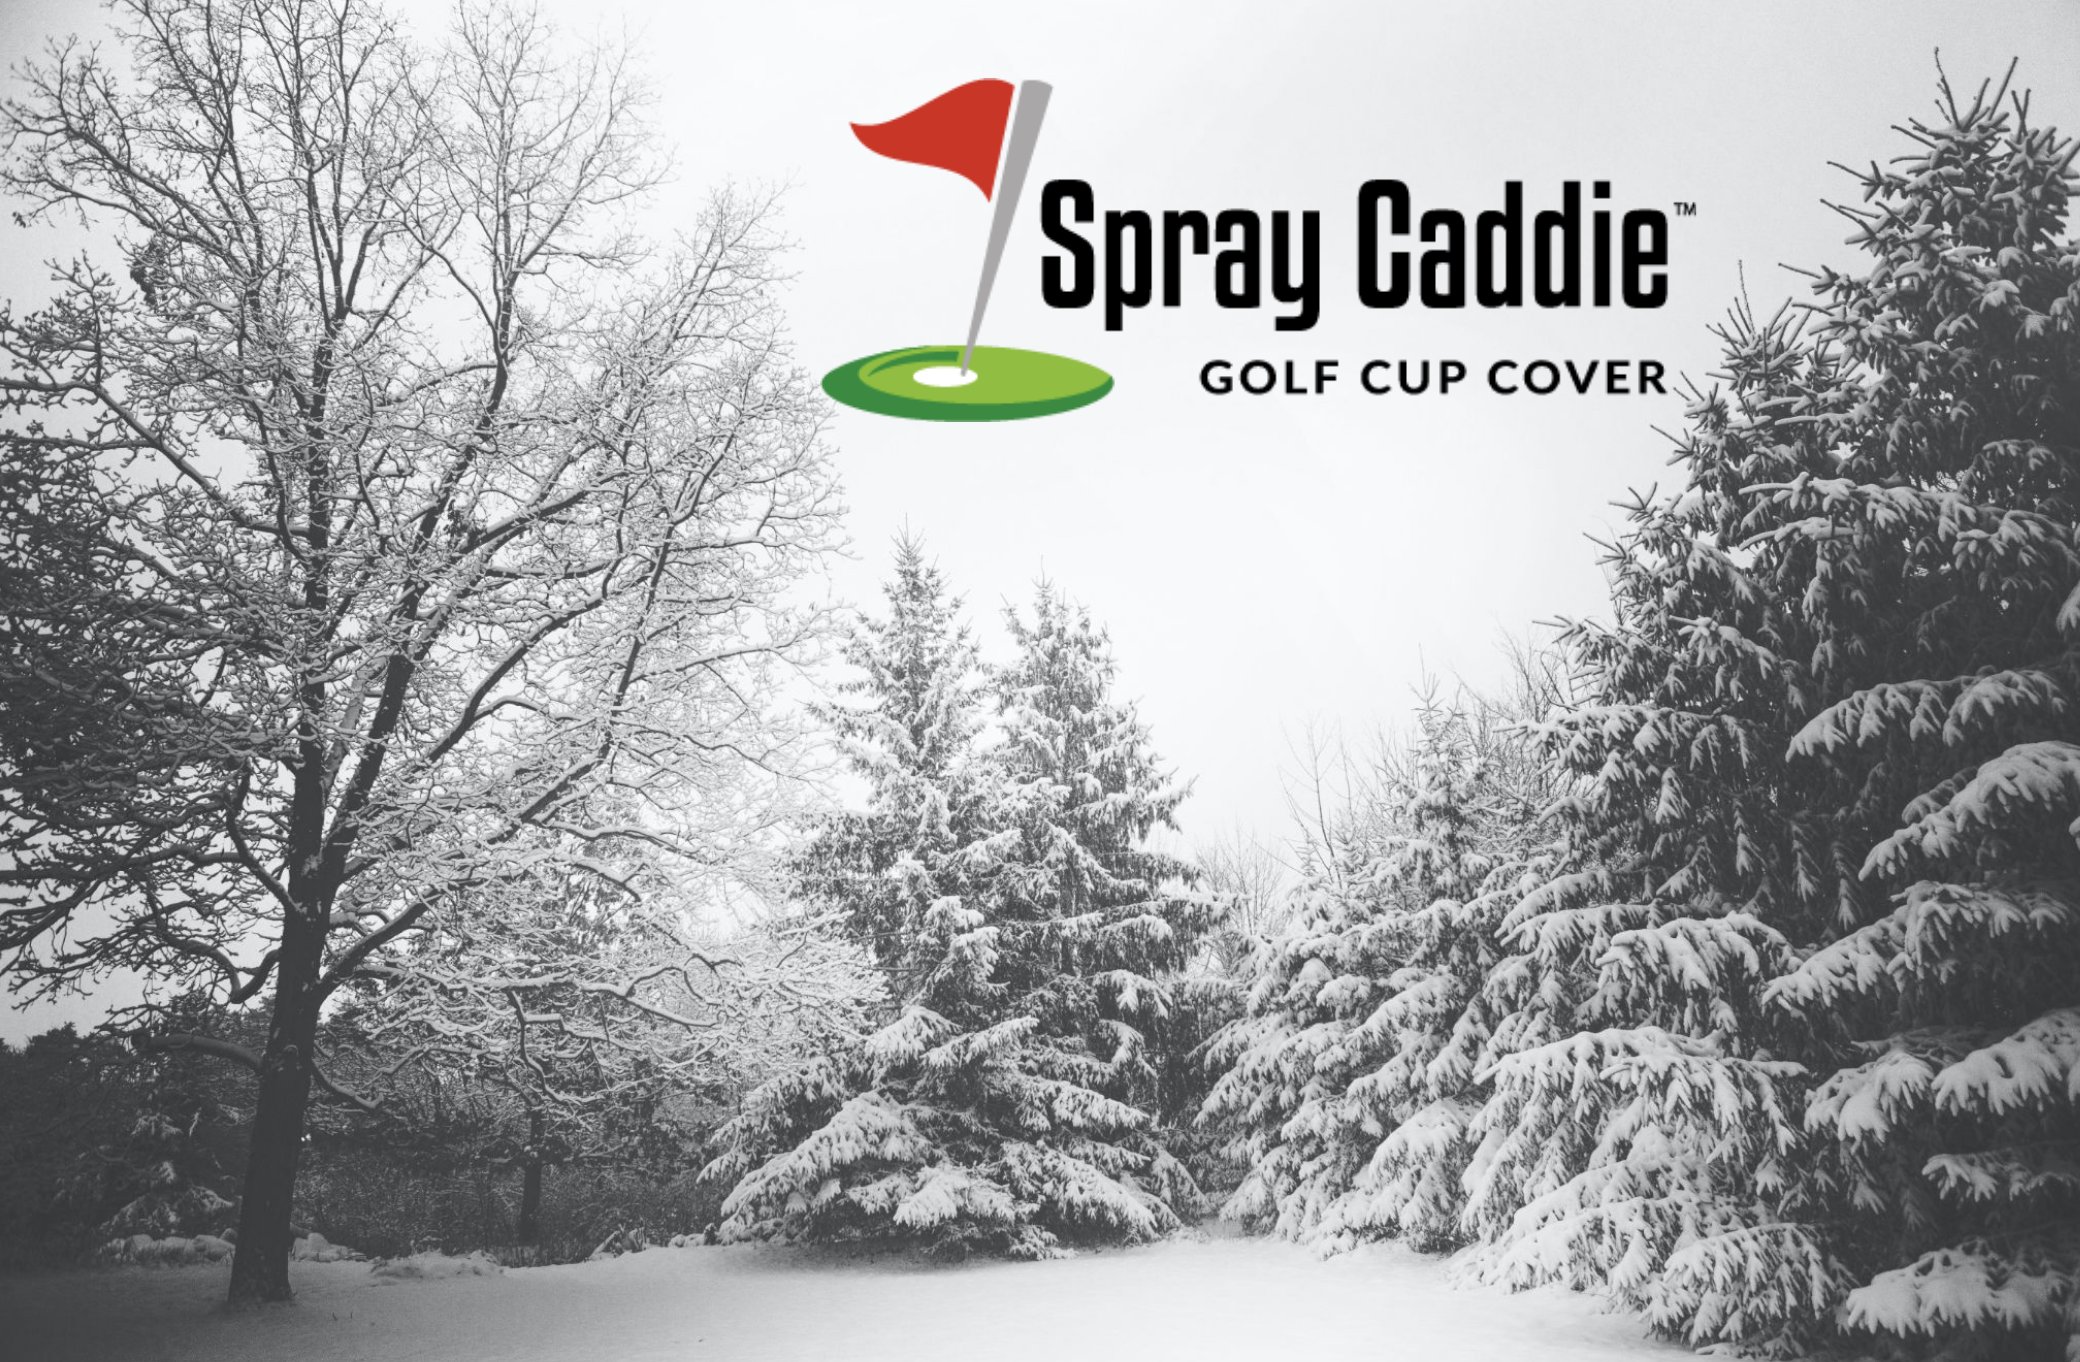 Spray Caddie Golf Cup Cover achieves patent-pending status in Canada - Golf  Course Industry